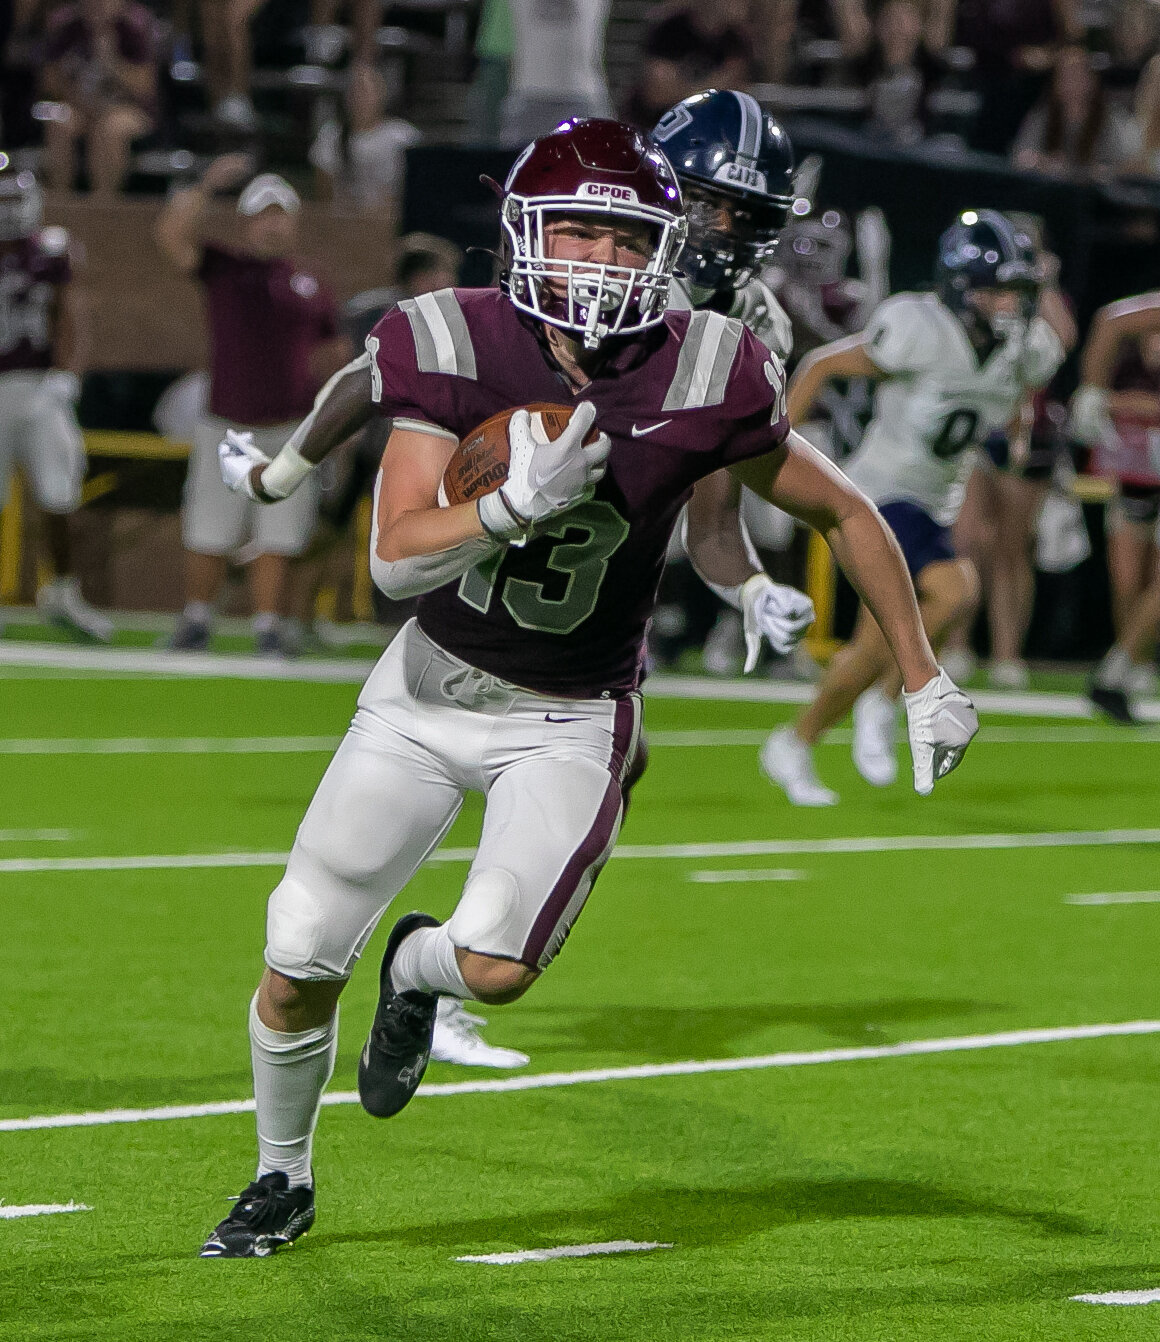 Drew Tureau takes off downfield after a catch during Friday's game between Cinco Ranch and College Park at Rhodes Stadium.